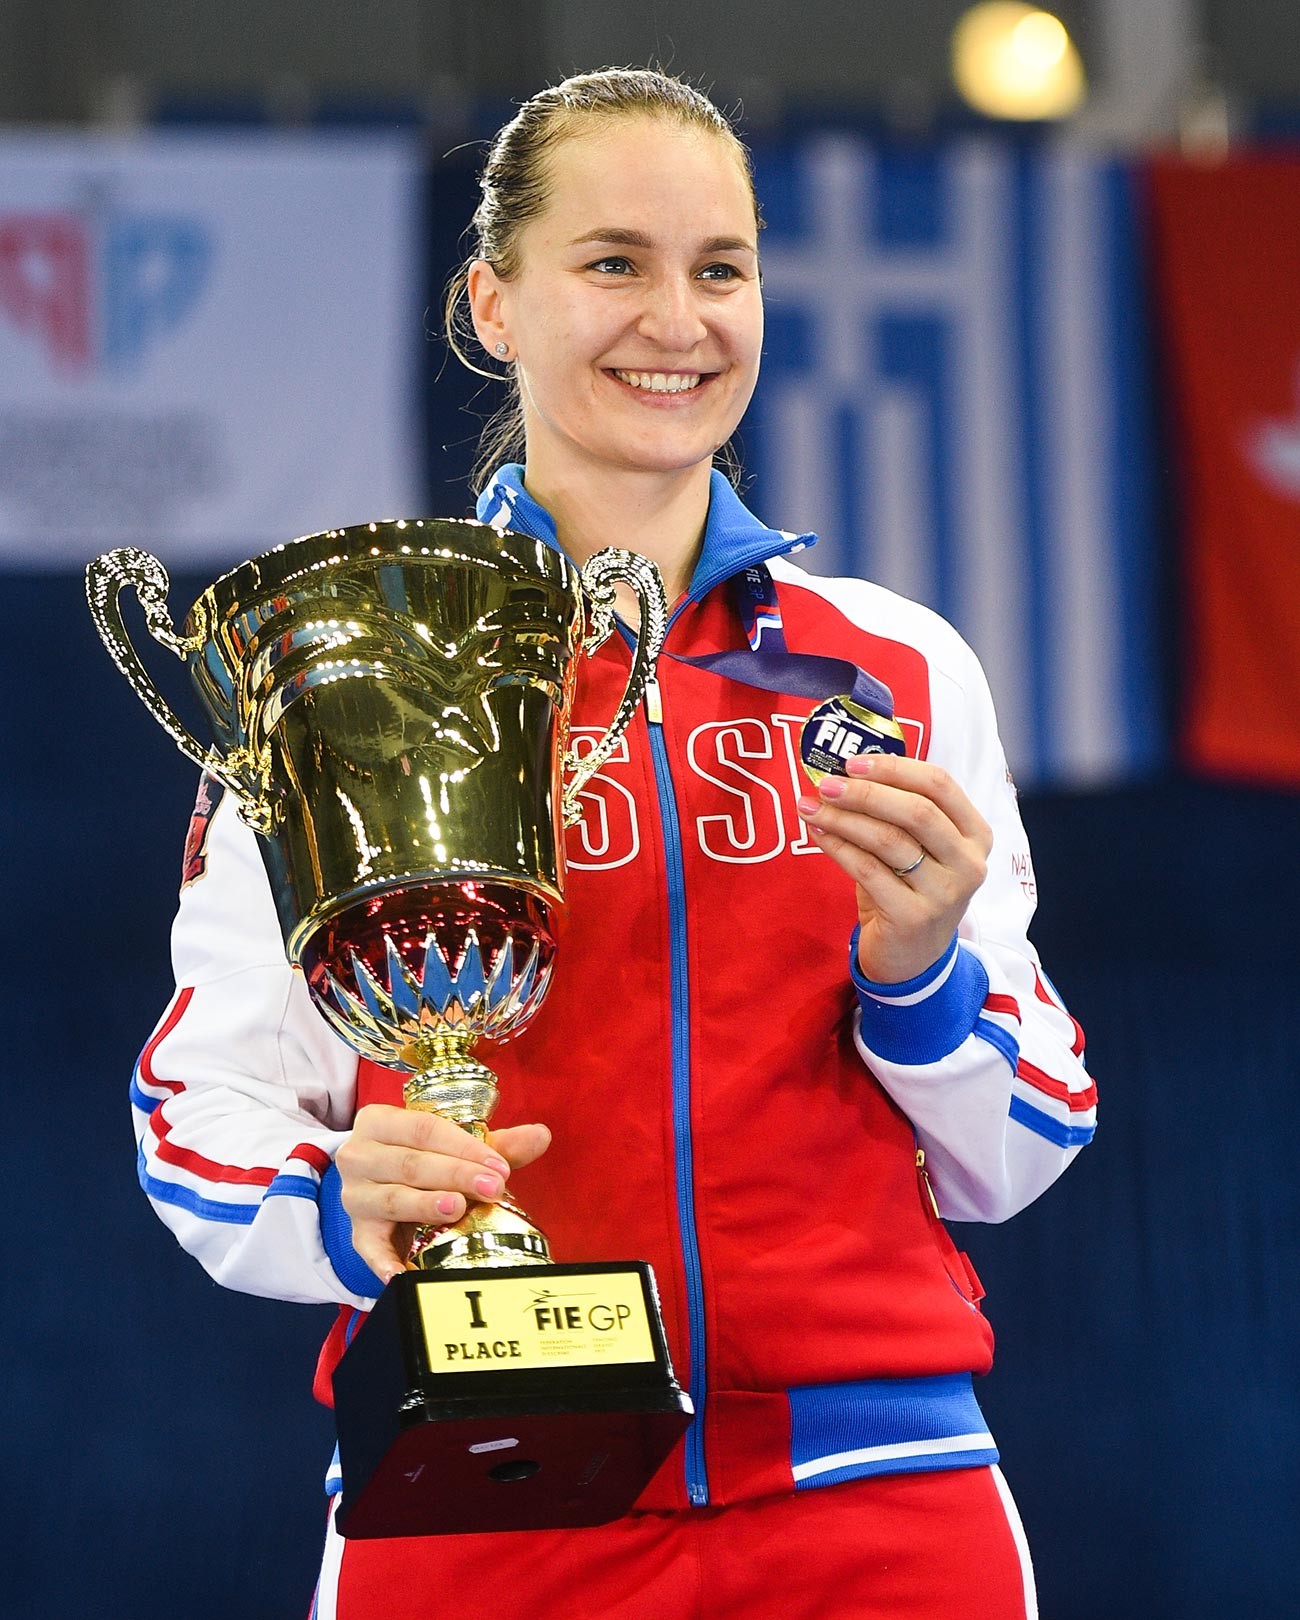 The winner in the competition of the personal championship among women at the international fencing tournament 